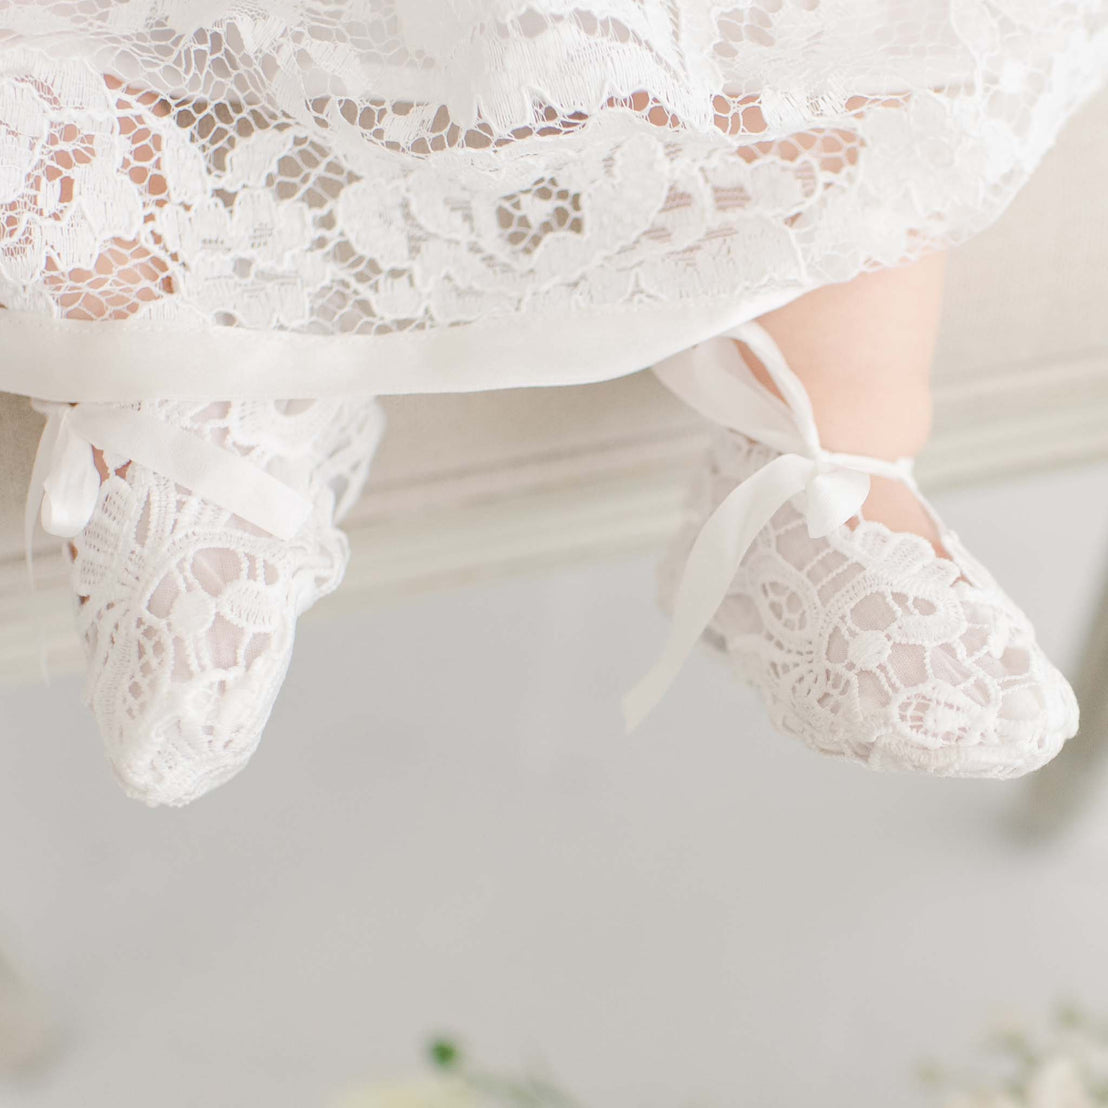 A close-up of a baby's feet in delicate white lace shoes from the Rose Accessory Bundle, tied with ribbon, barely touching the floor, with a traditional heirloom dress for a baptism.